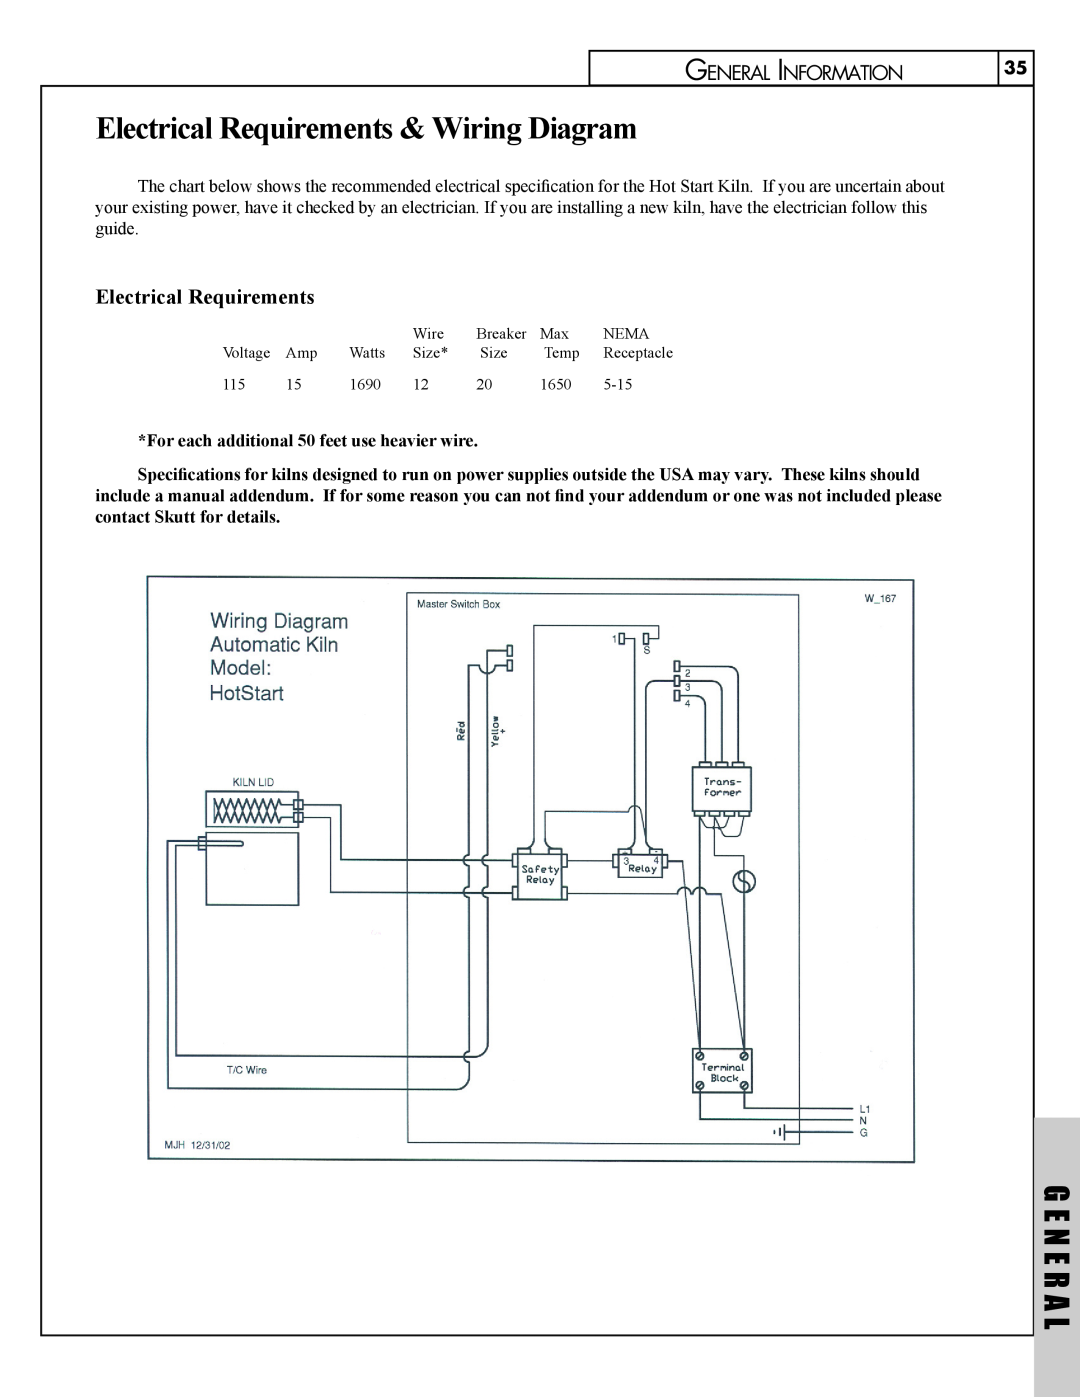 Skuttle Indoor Air Quality Products Klin manual Electrical Requirements & Wiring Diagram, G E N E R A L 